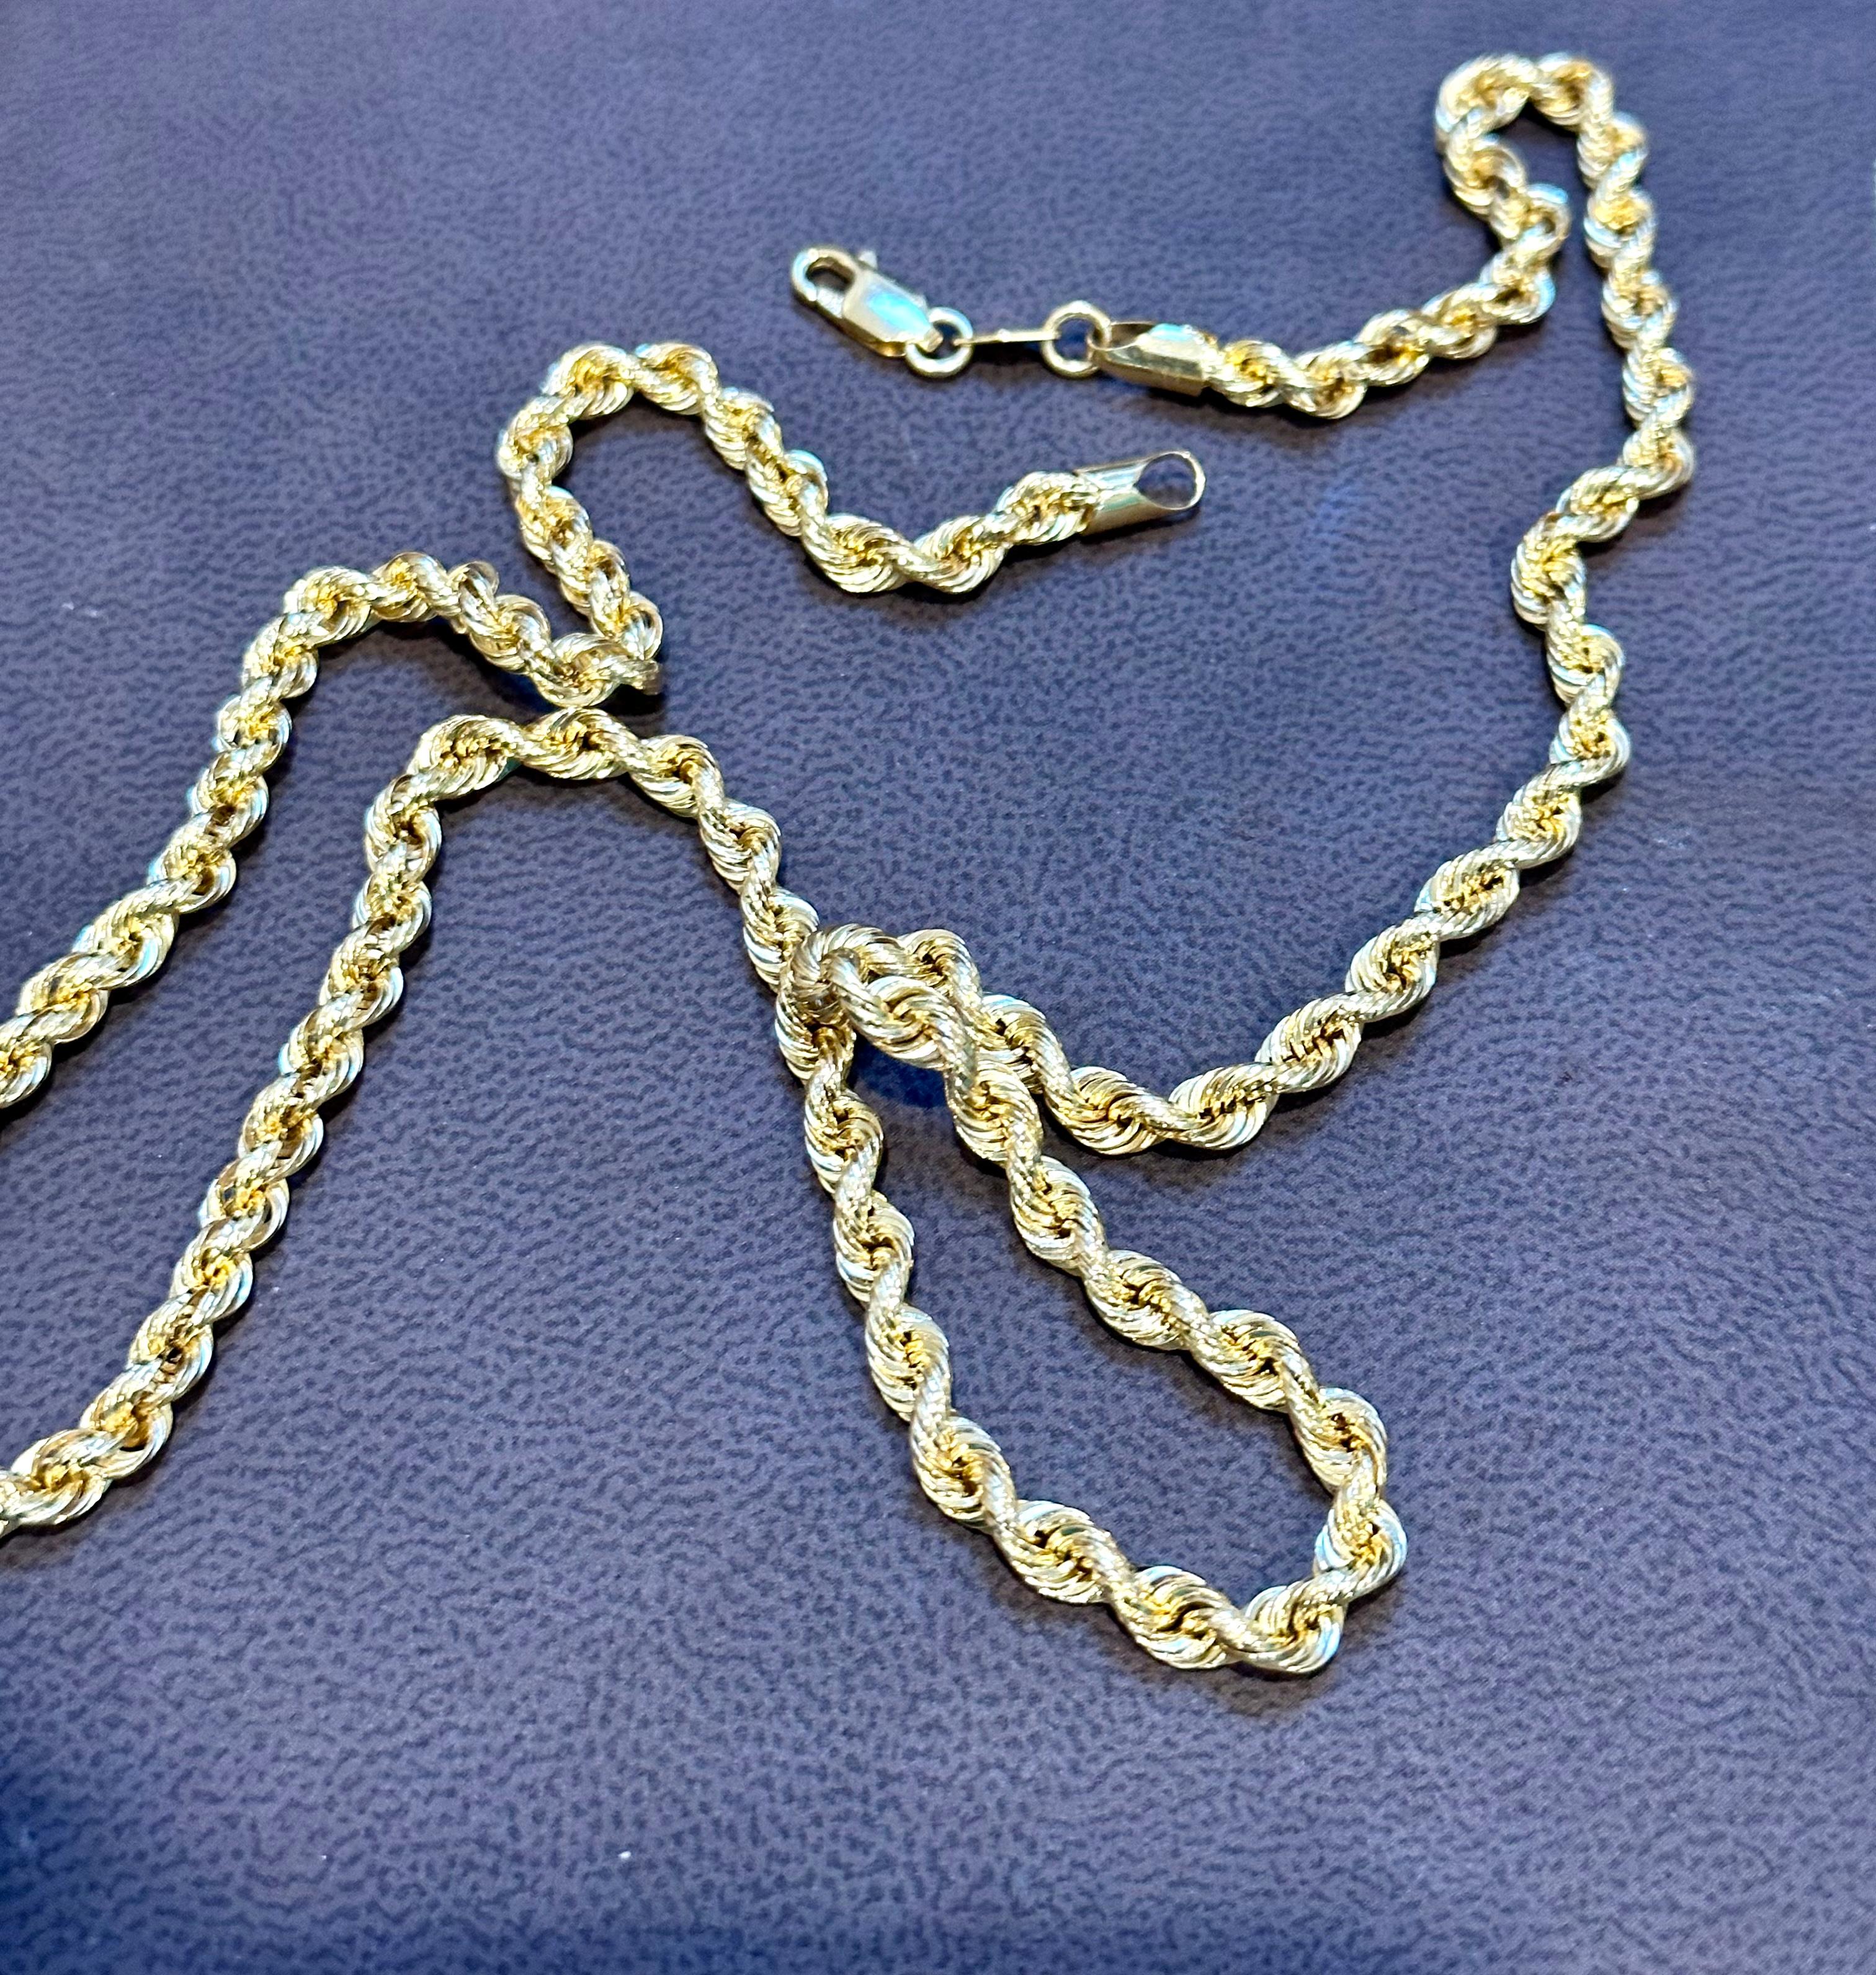 Vintage 14 Karat Yellow Gold 8.3 Gm, Rope Chain Necklace For Sale 3